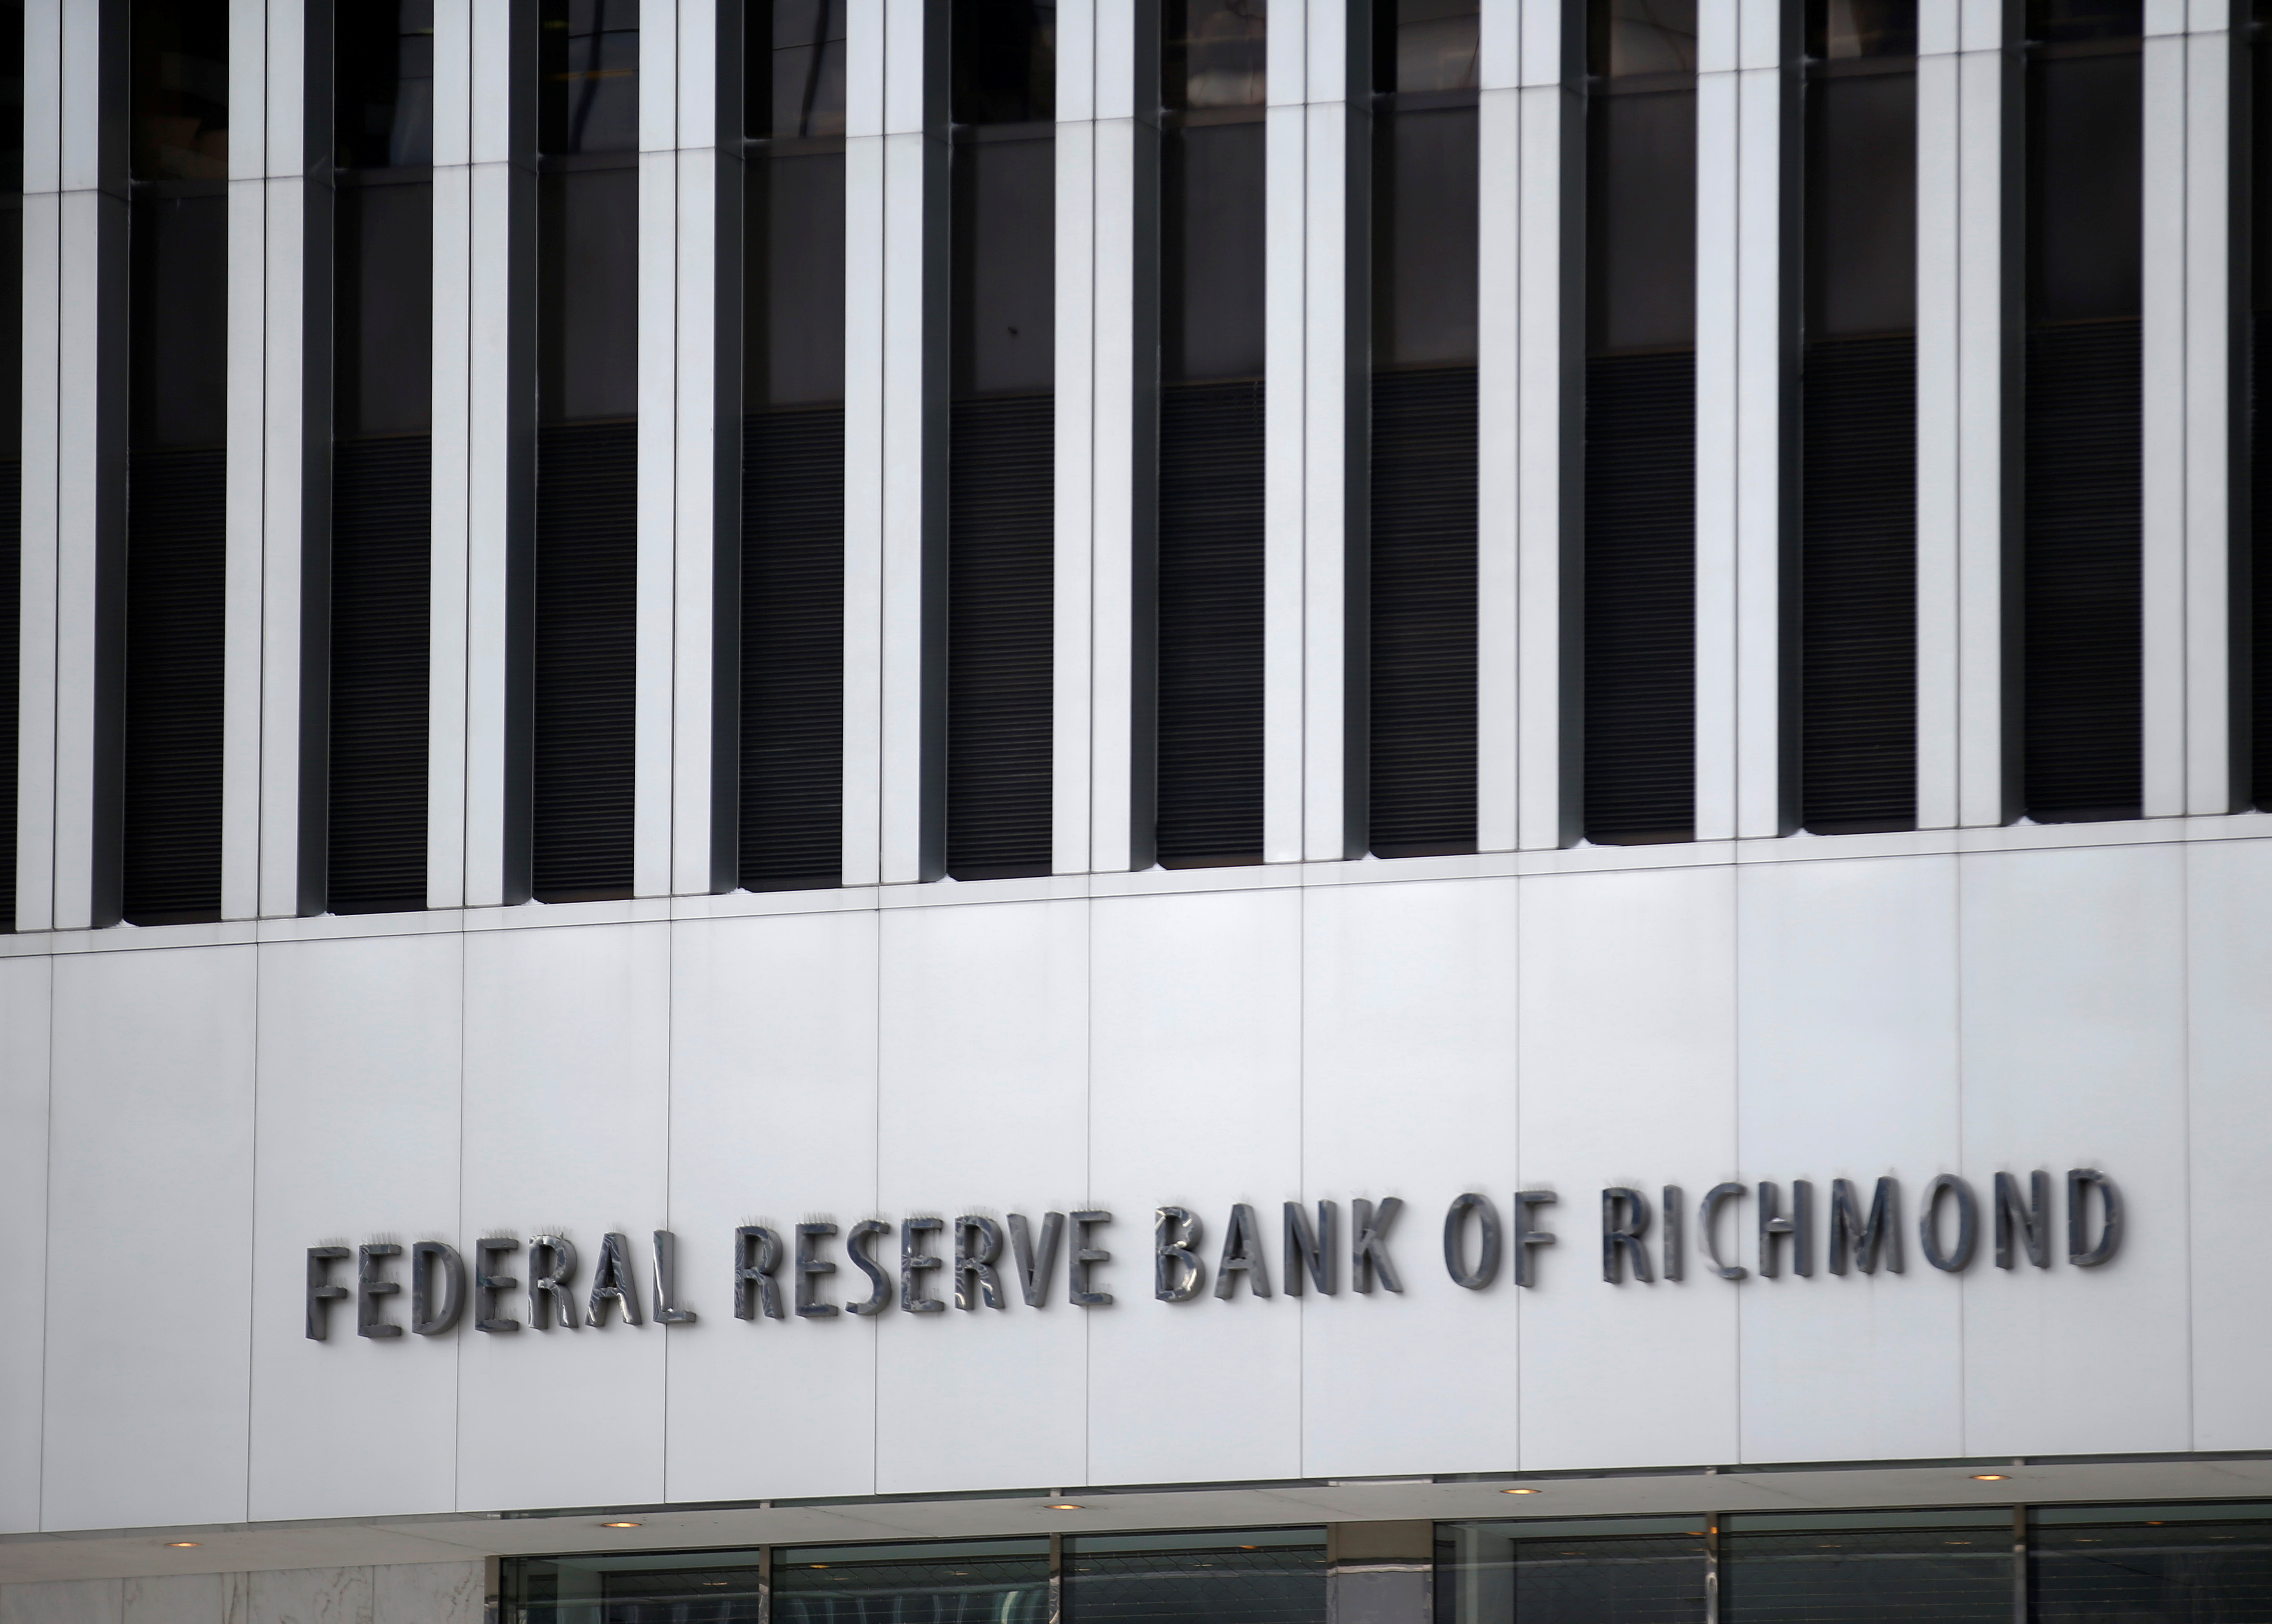 The Federal Reserve Bank of Richmond stands in Richmond, Virginia